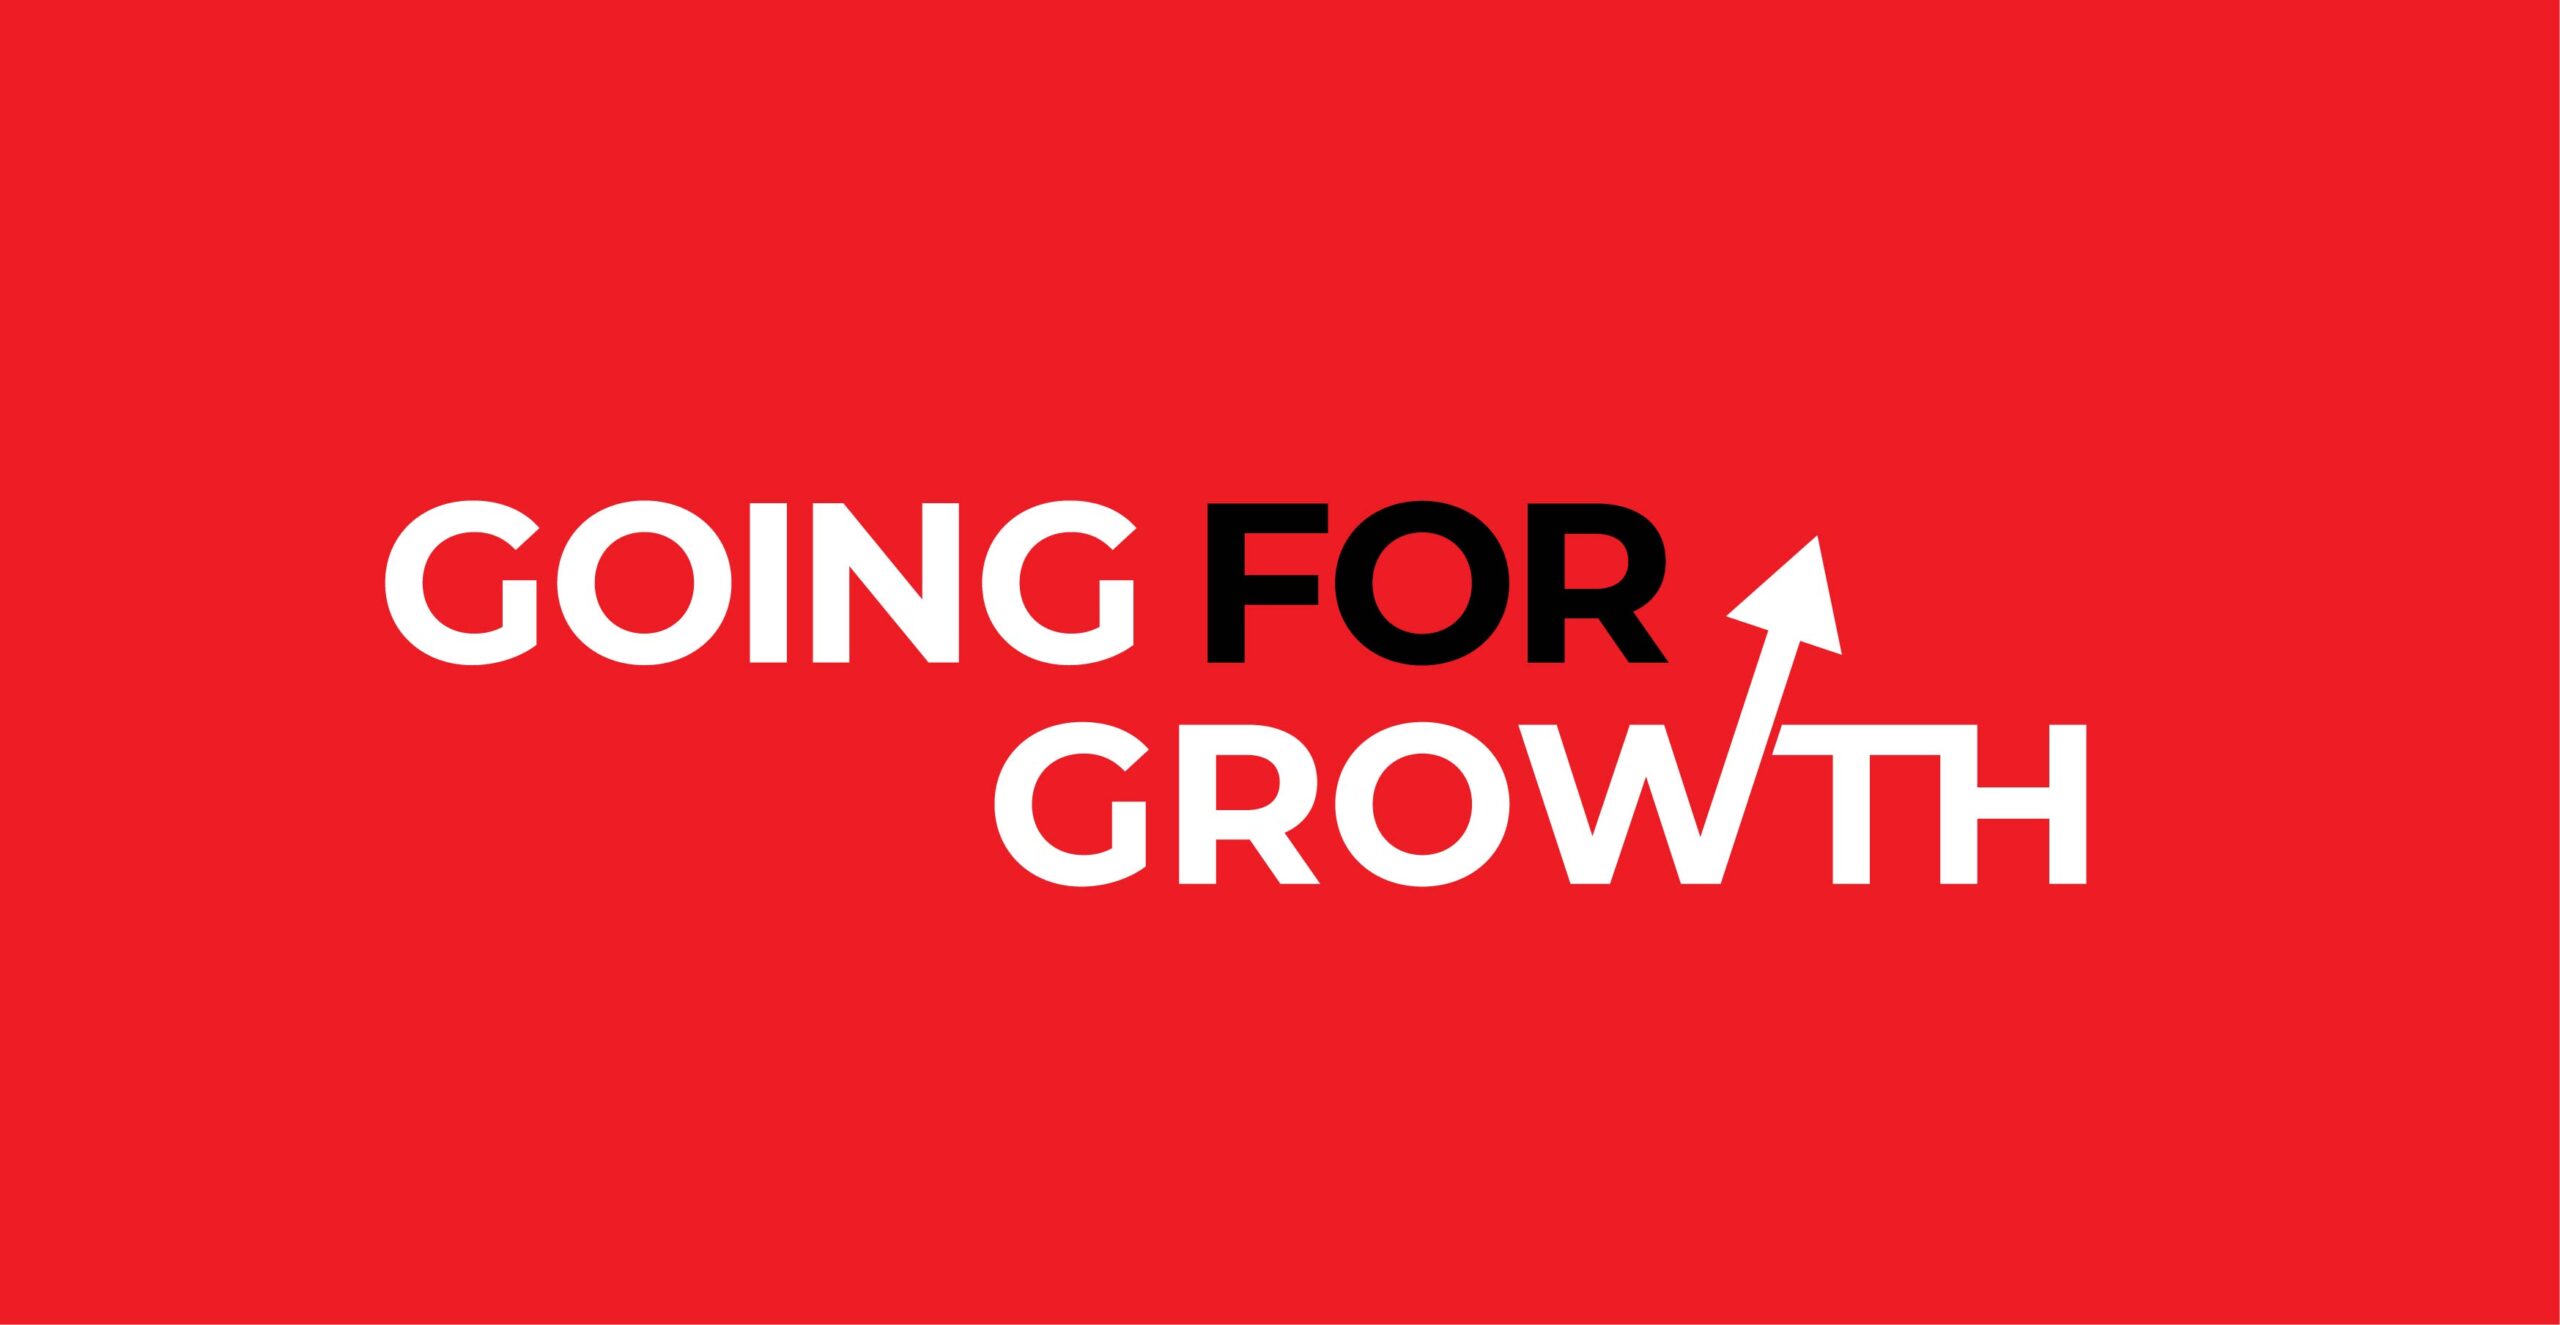 Going For Growth - Red Background